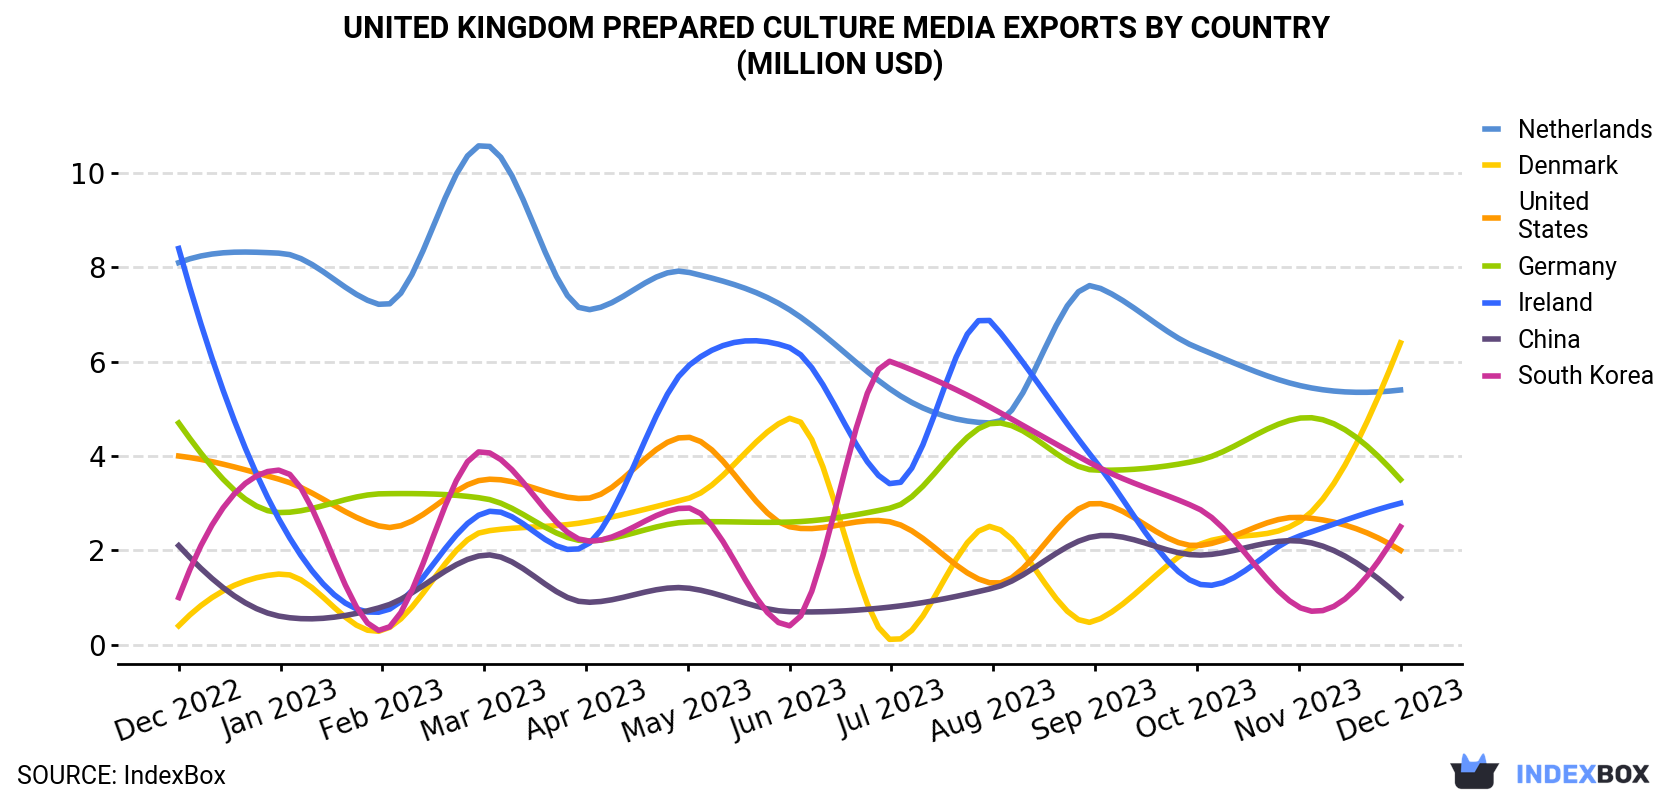 United Kingdom Prepared Culture Media Exports By Country (Million USD)